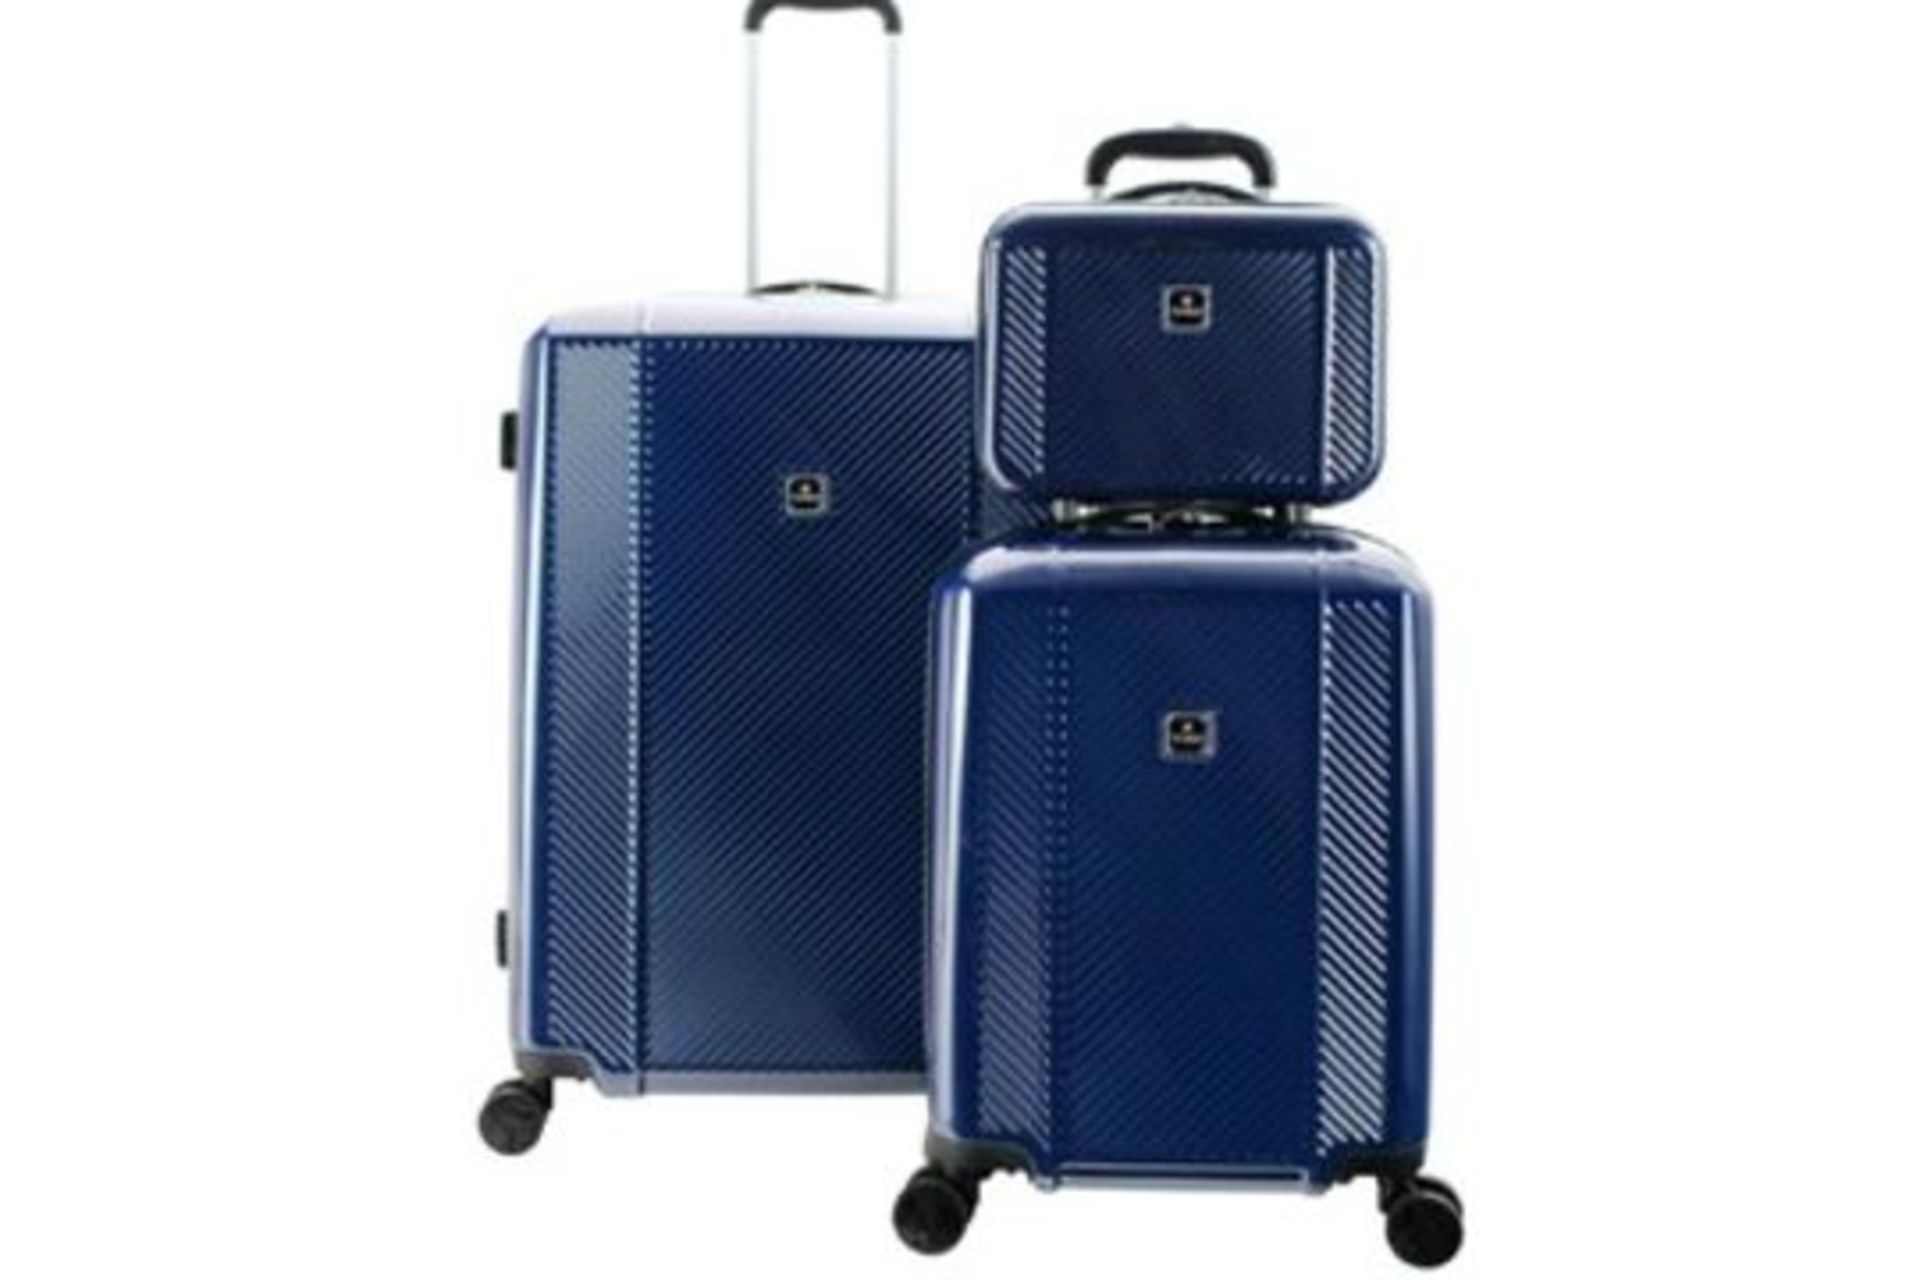 New Boxed 3 Piece Sets of TAG Spectrum Hardside Luggage Set. (BLUE). RRP £199.99 per set. Get - Image 2 of 2